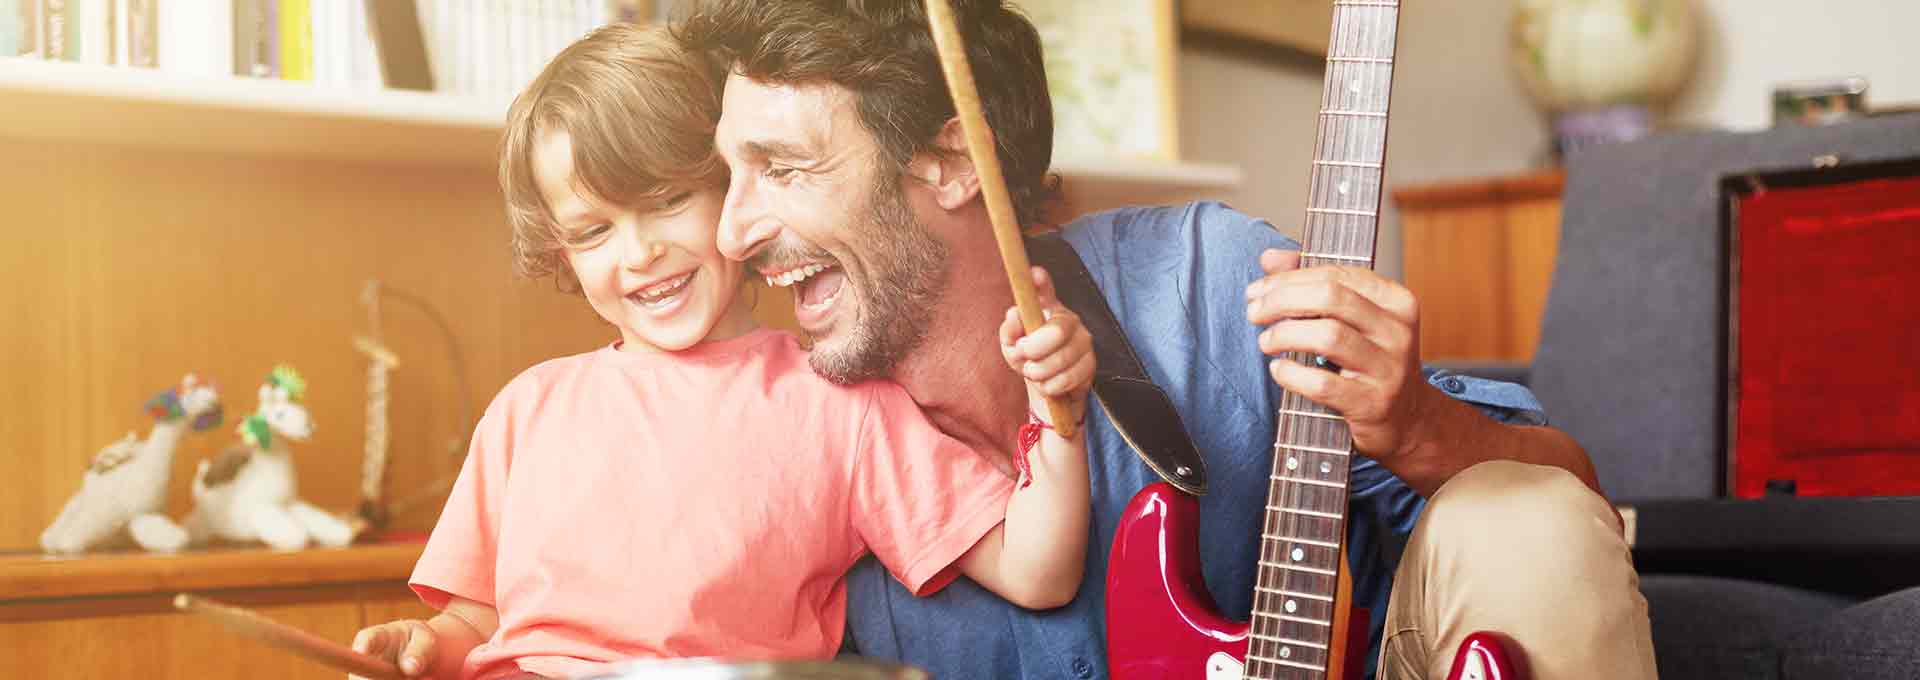 Father with Bernafon Viron hearing aids playing guitar with his five year old son playing the drums and enjoying the moment.